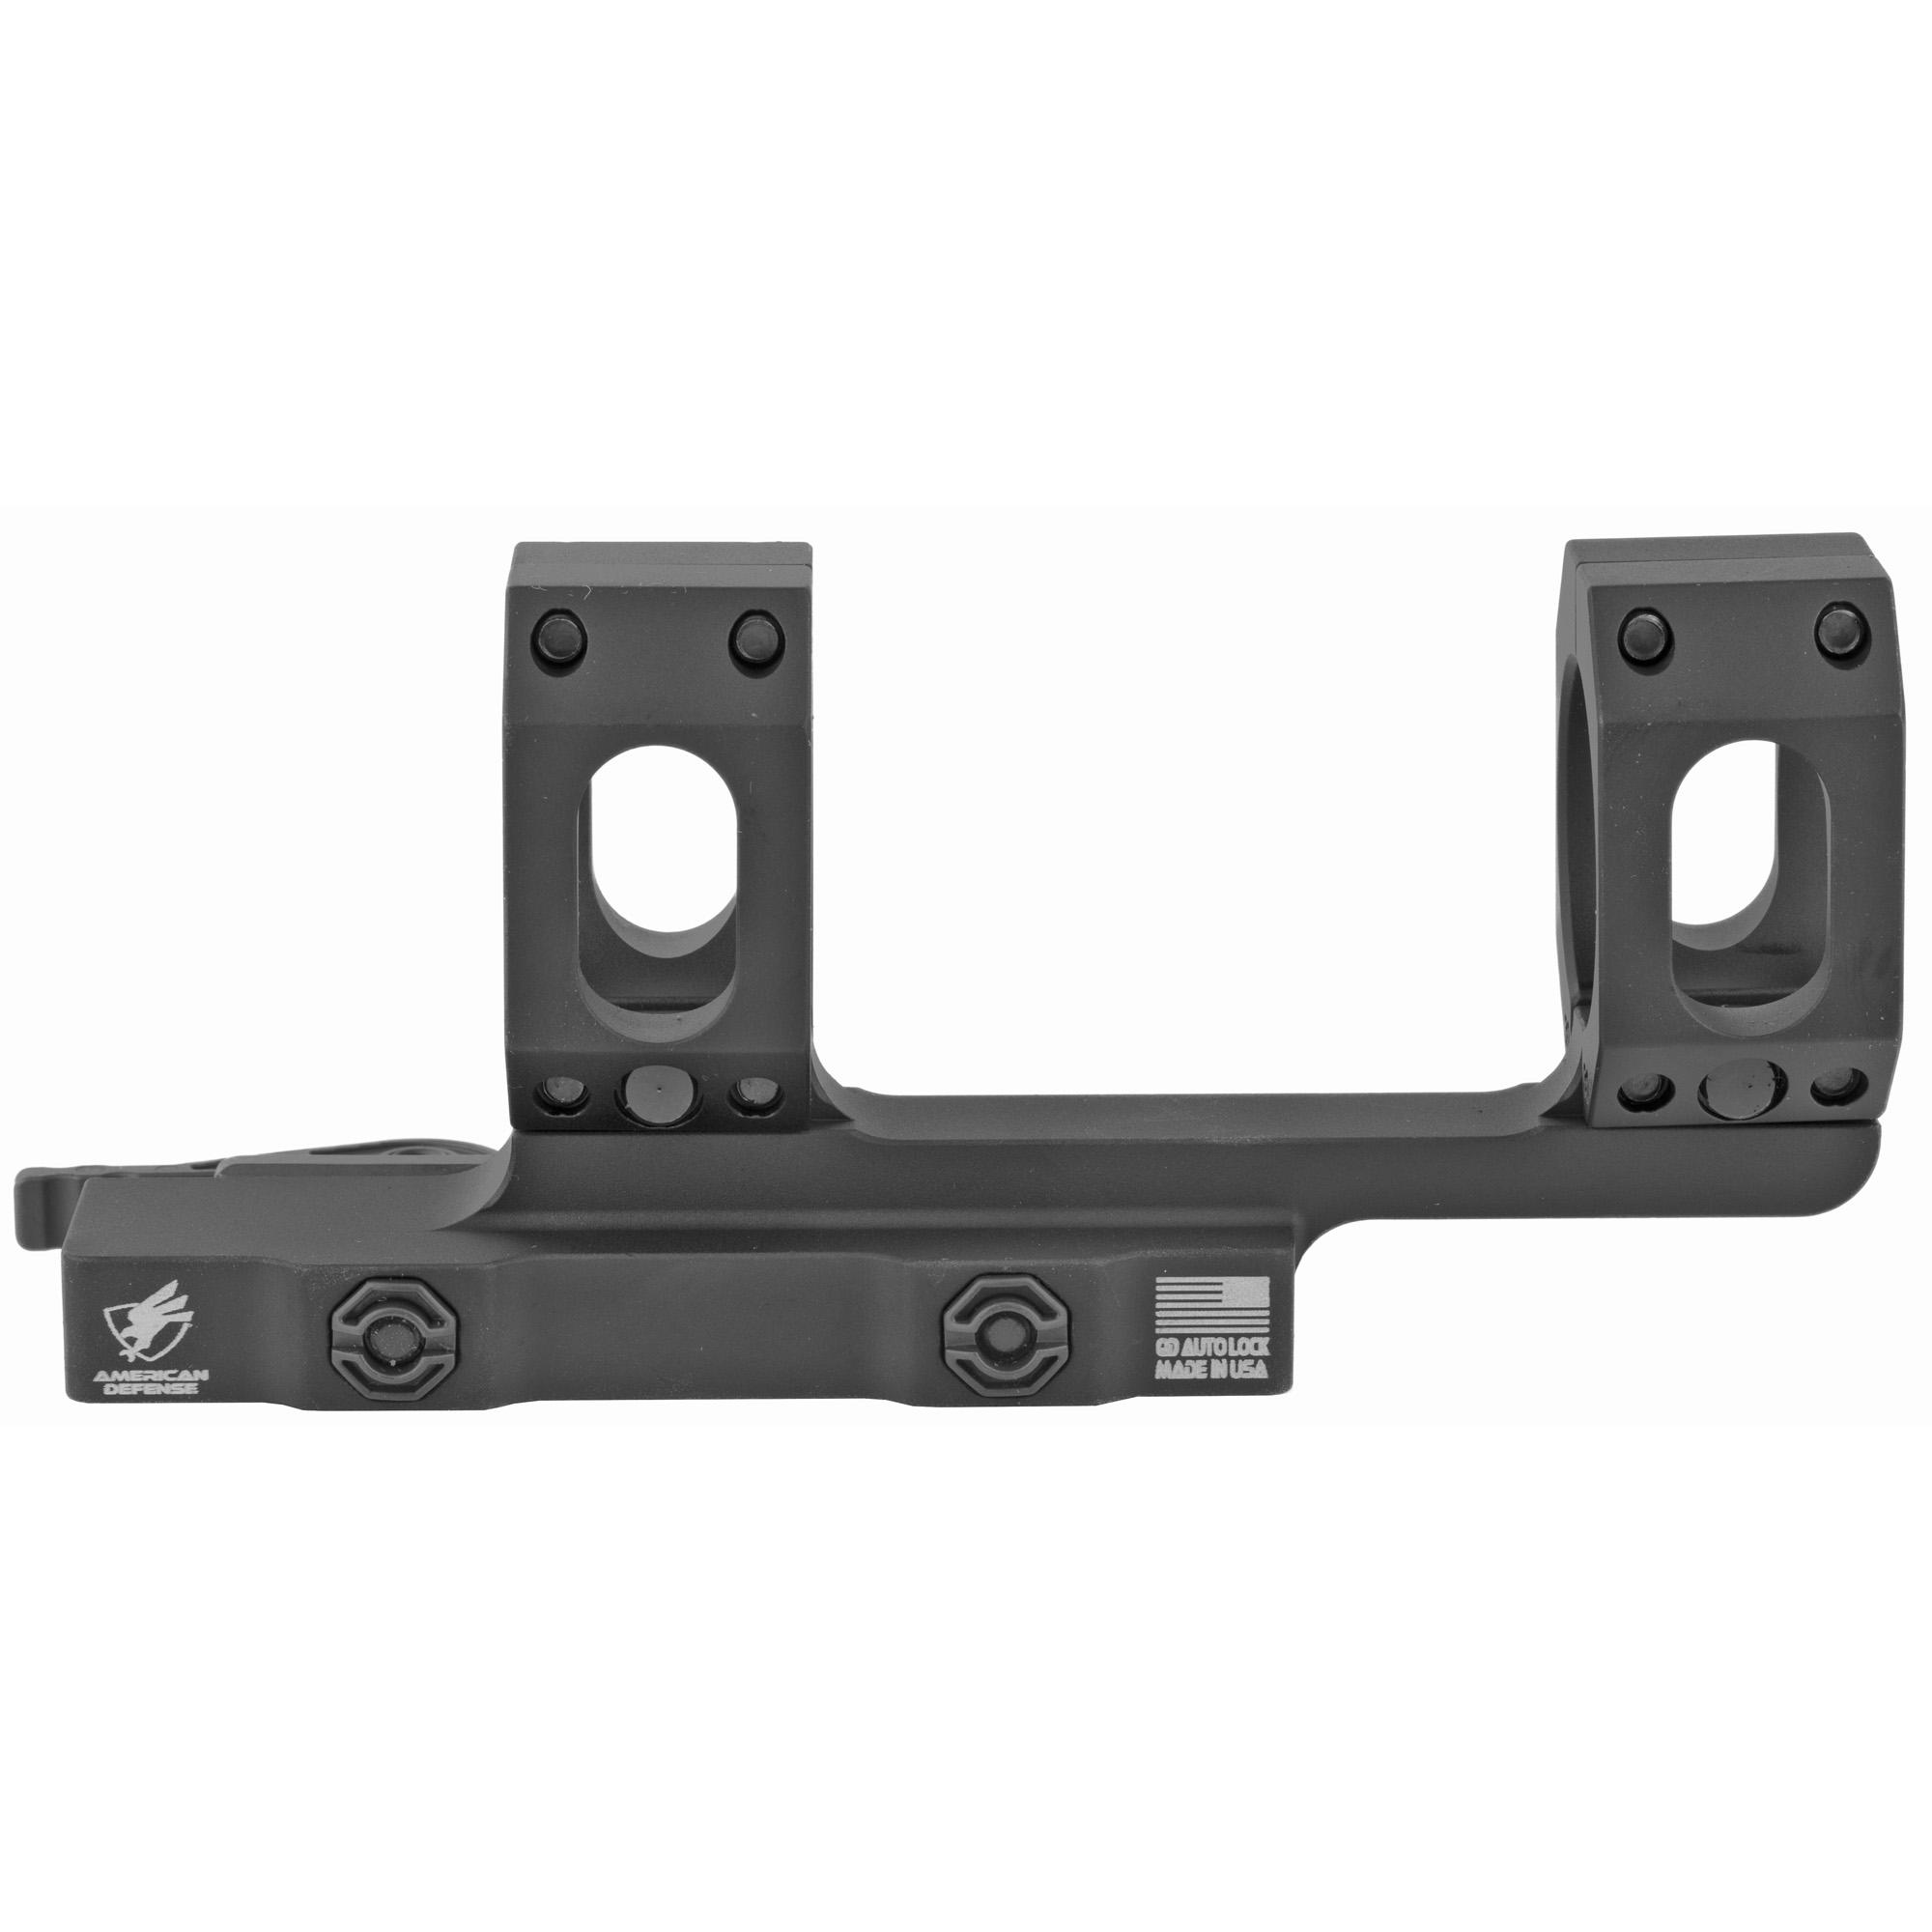 American Defense Mfg. American Defense Mfg. Scope Mount 30mm Dual Quick Release Ti